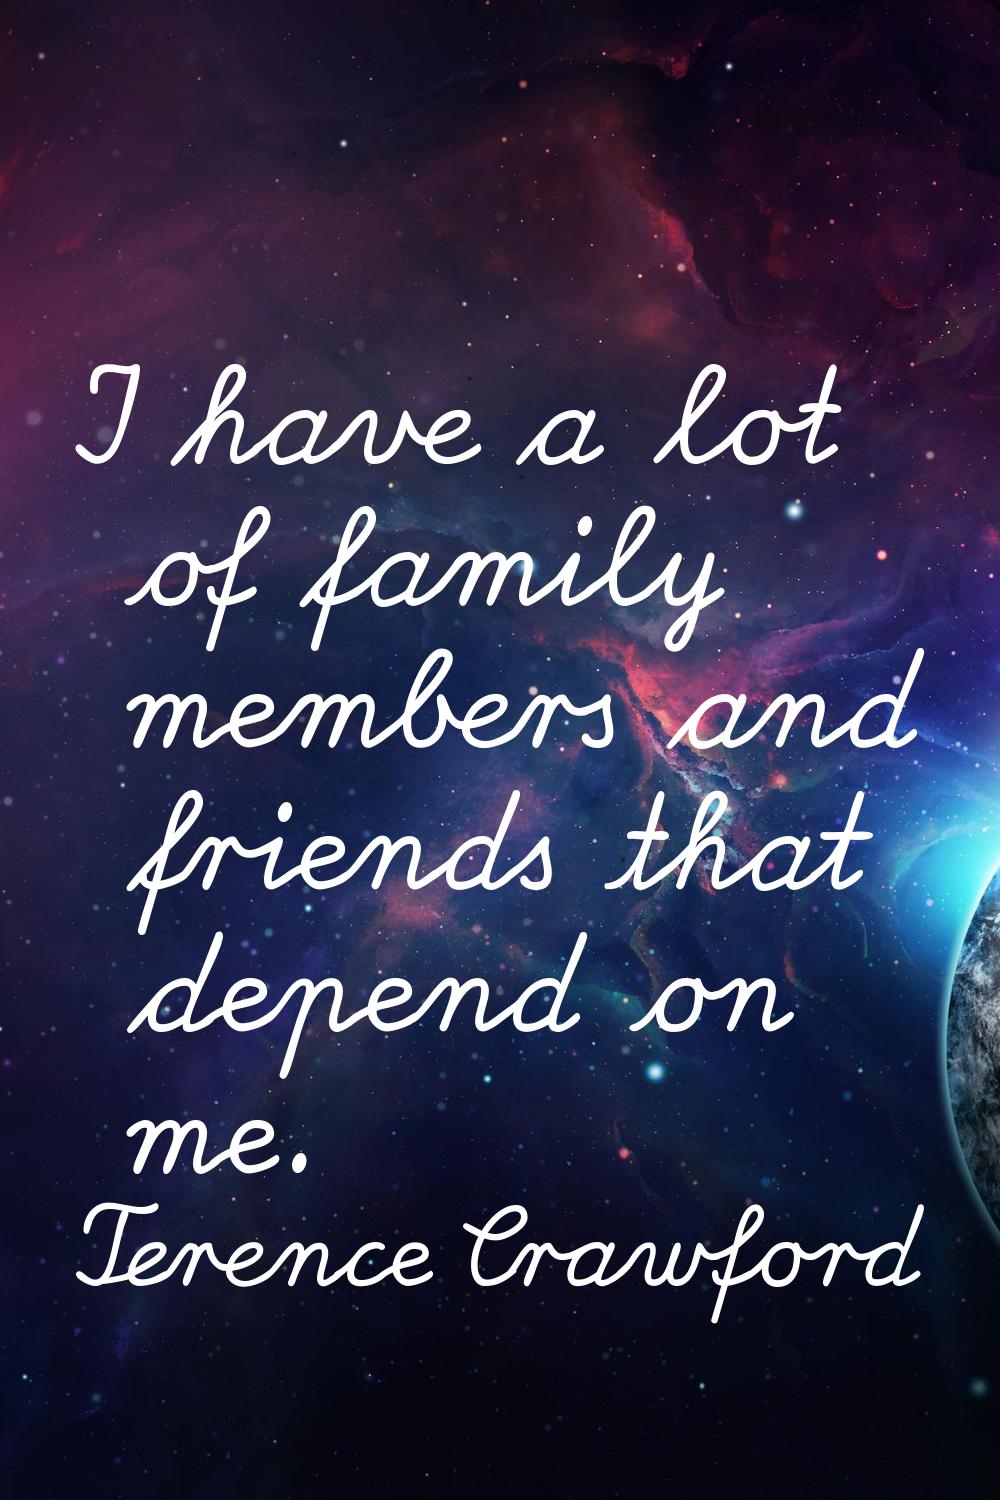 I have a lot of family members and friends that depend on me.